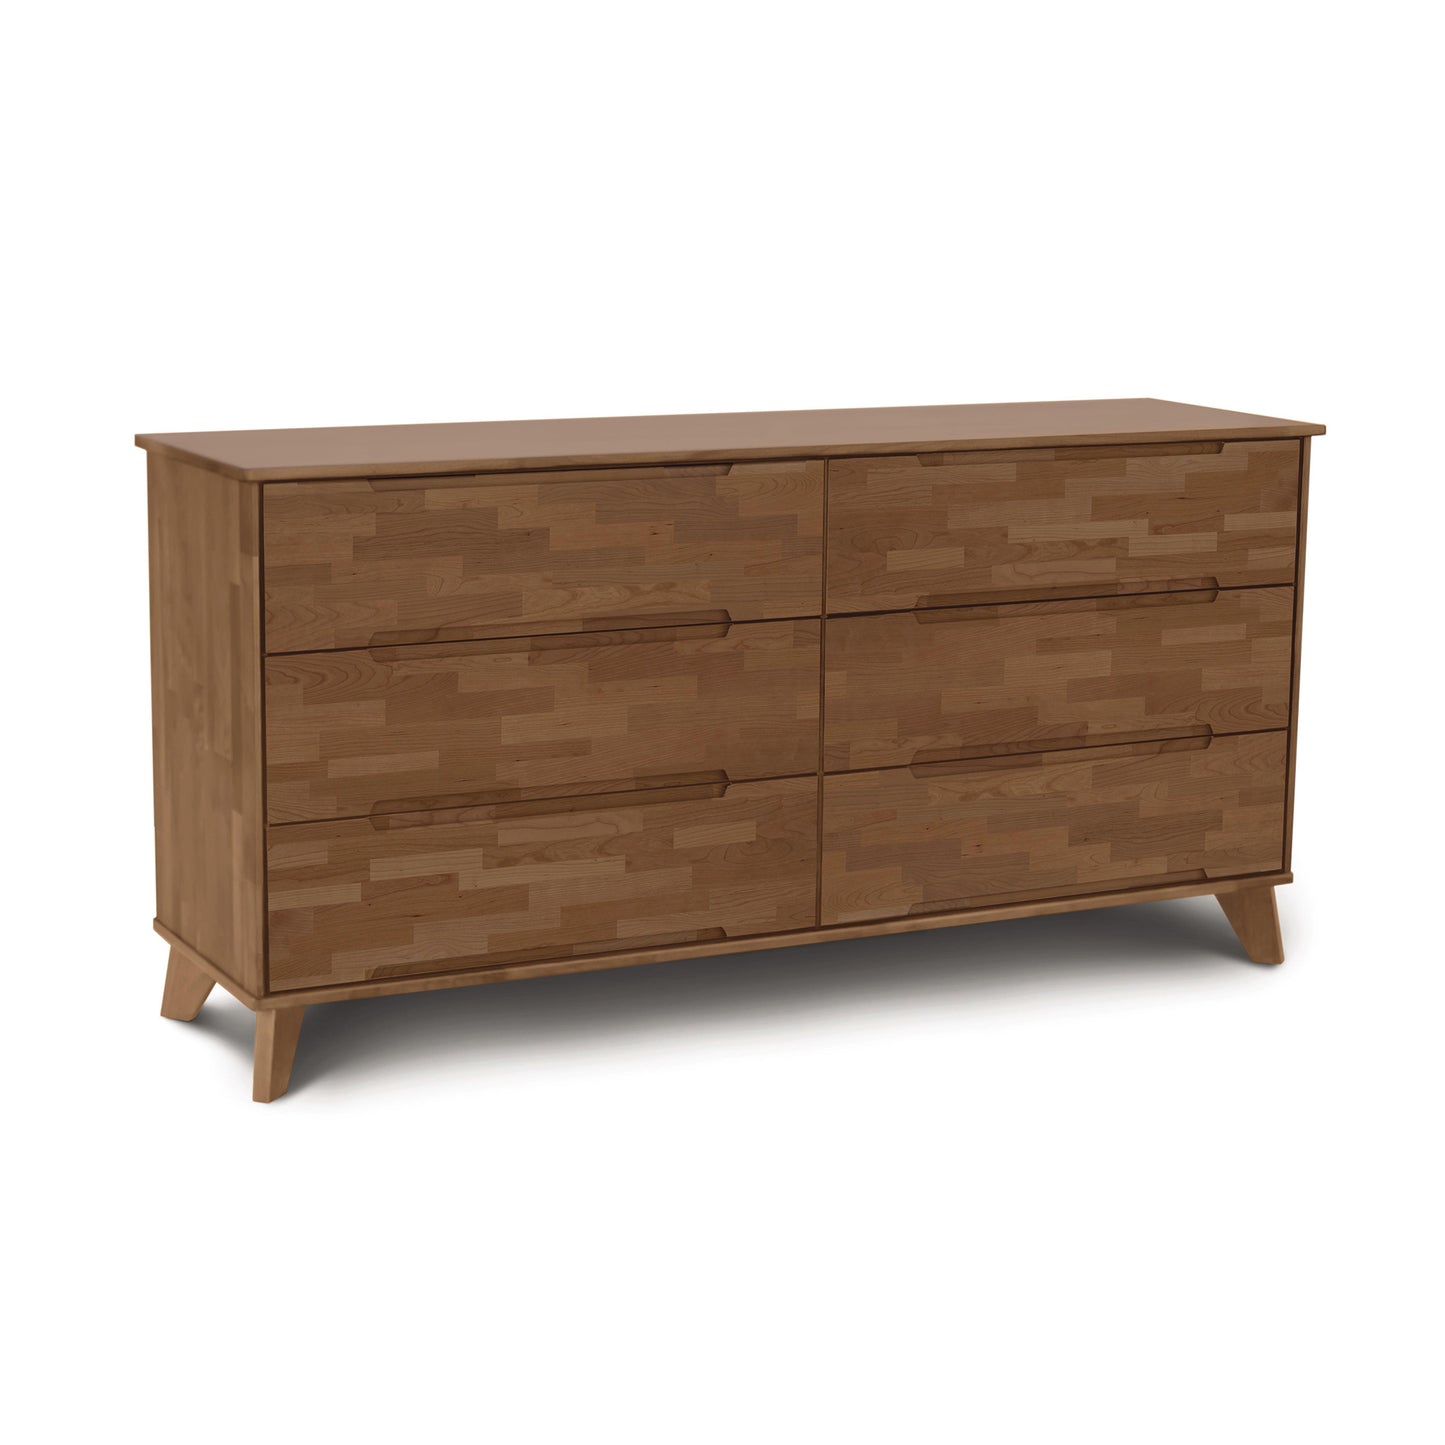 A sustainable wooden Linn 6-Drawer Dresser with a mid-century modern design by Copeland Furniture, shown on a white background.